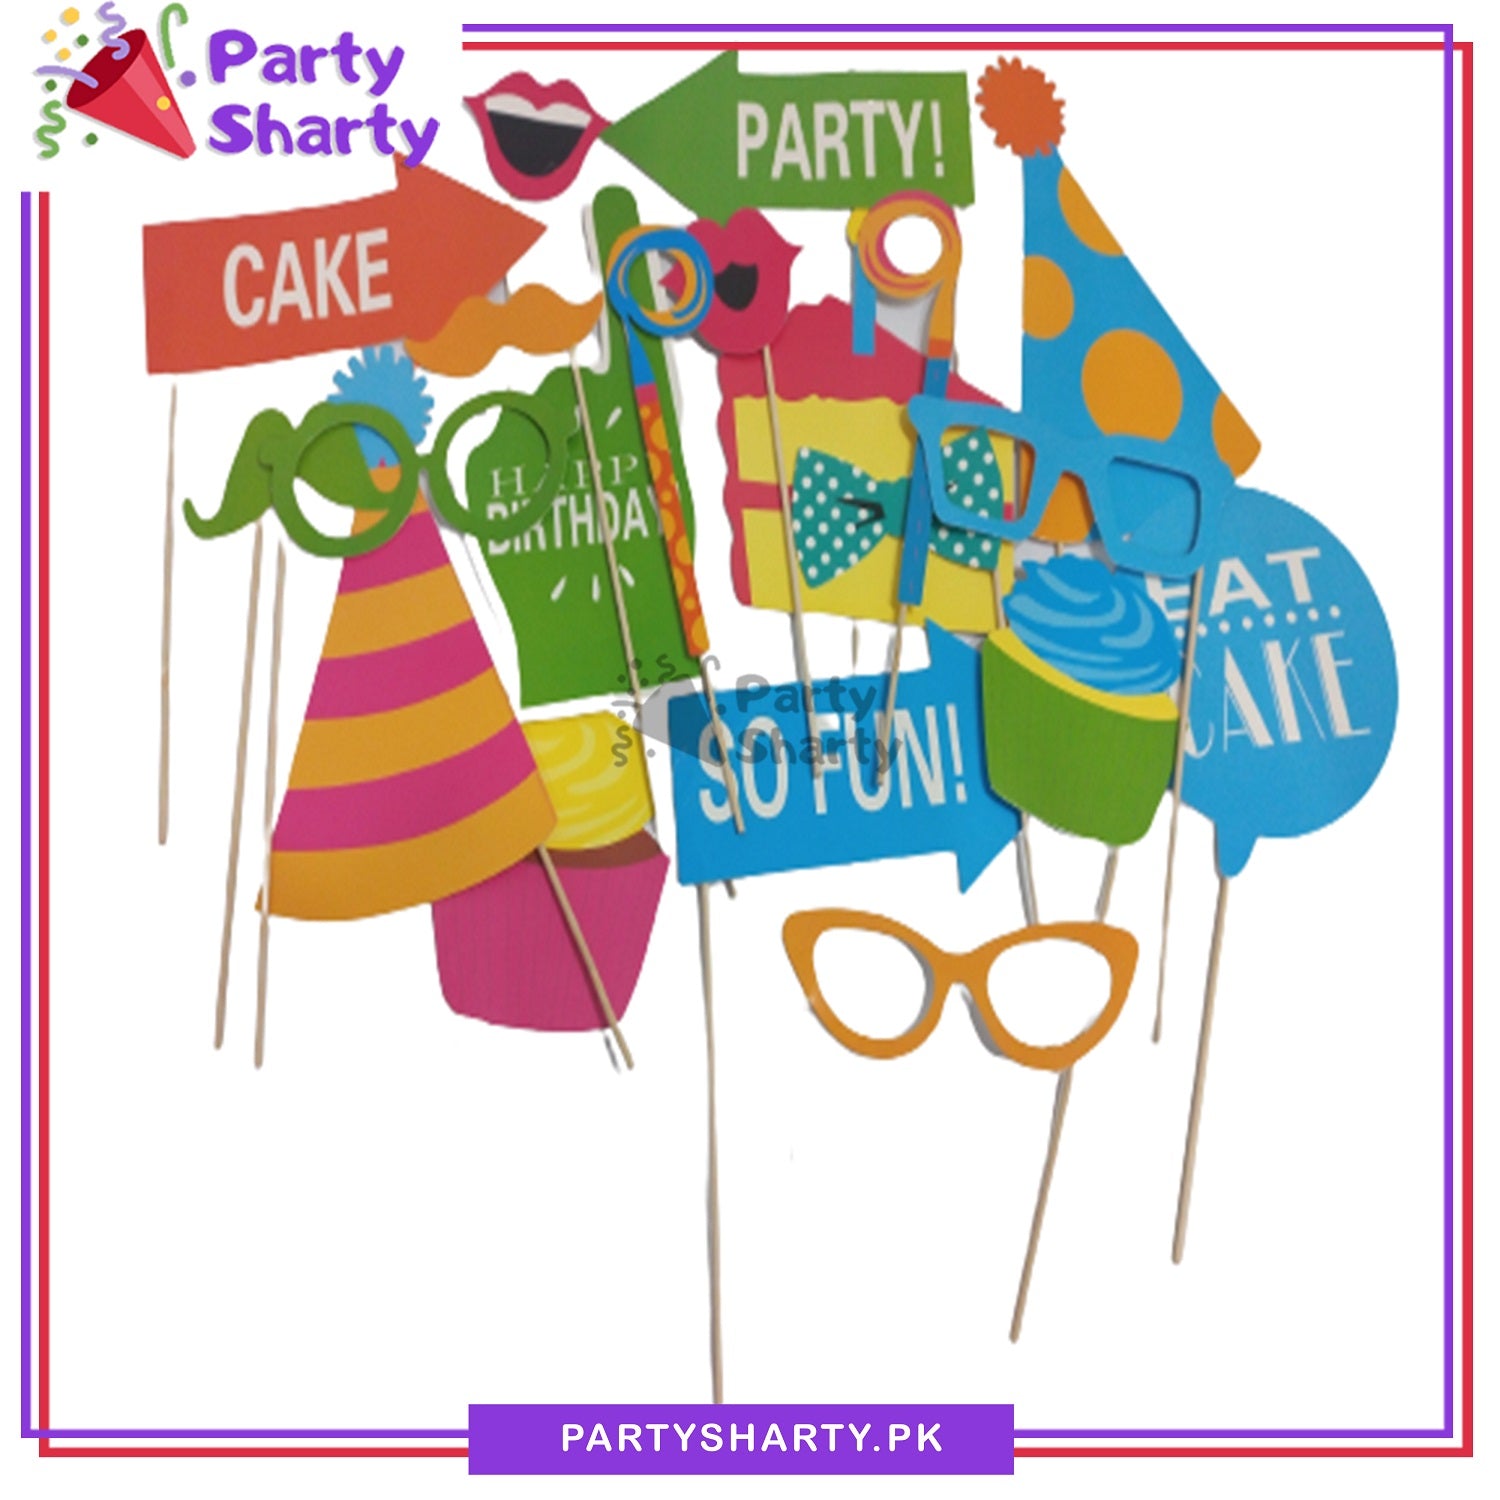 Happy Birthday Party Theme Photo Booth Props For Birthday Party Celebration and Decoration